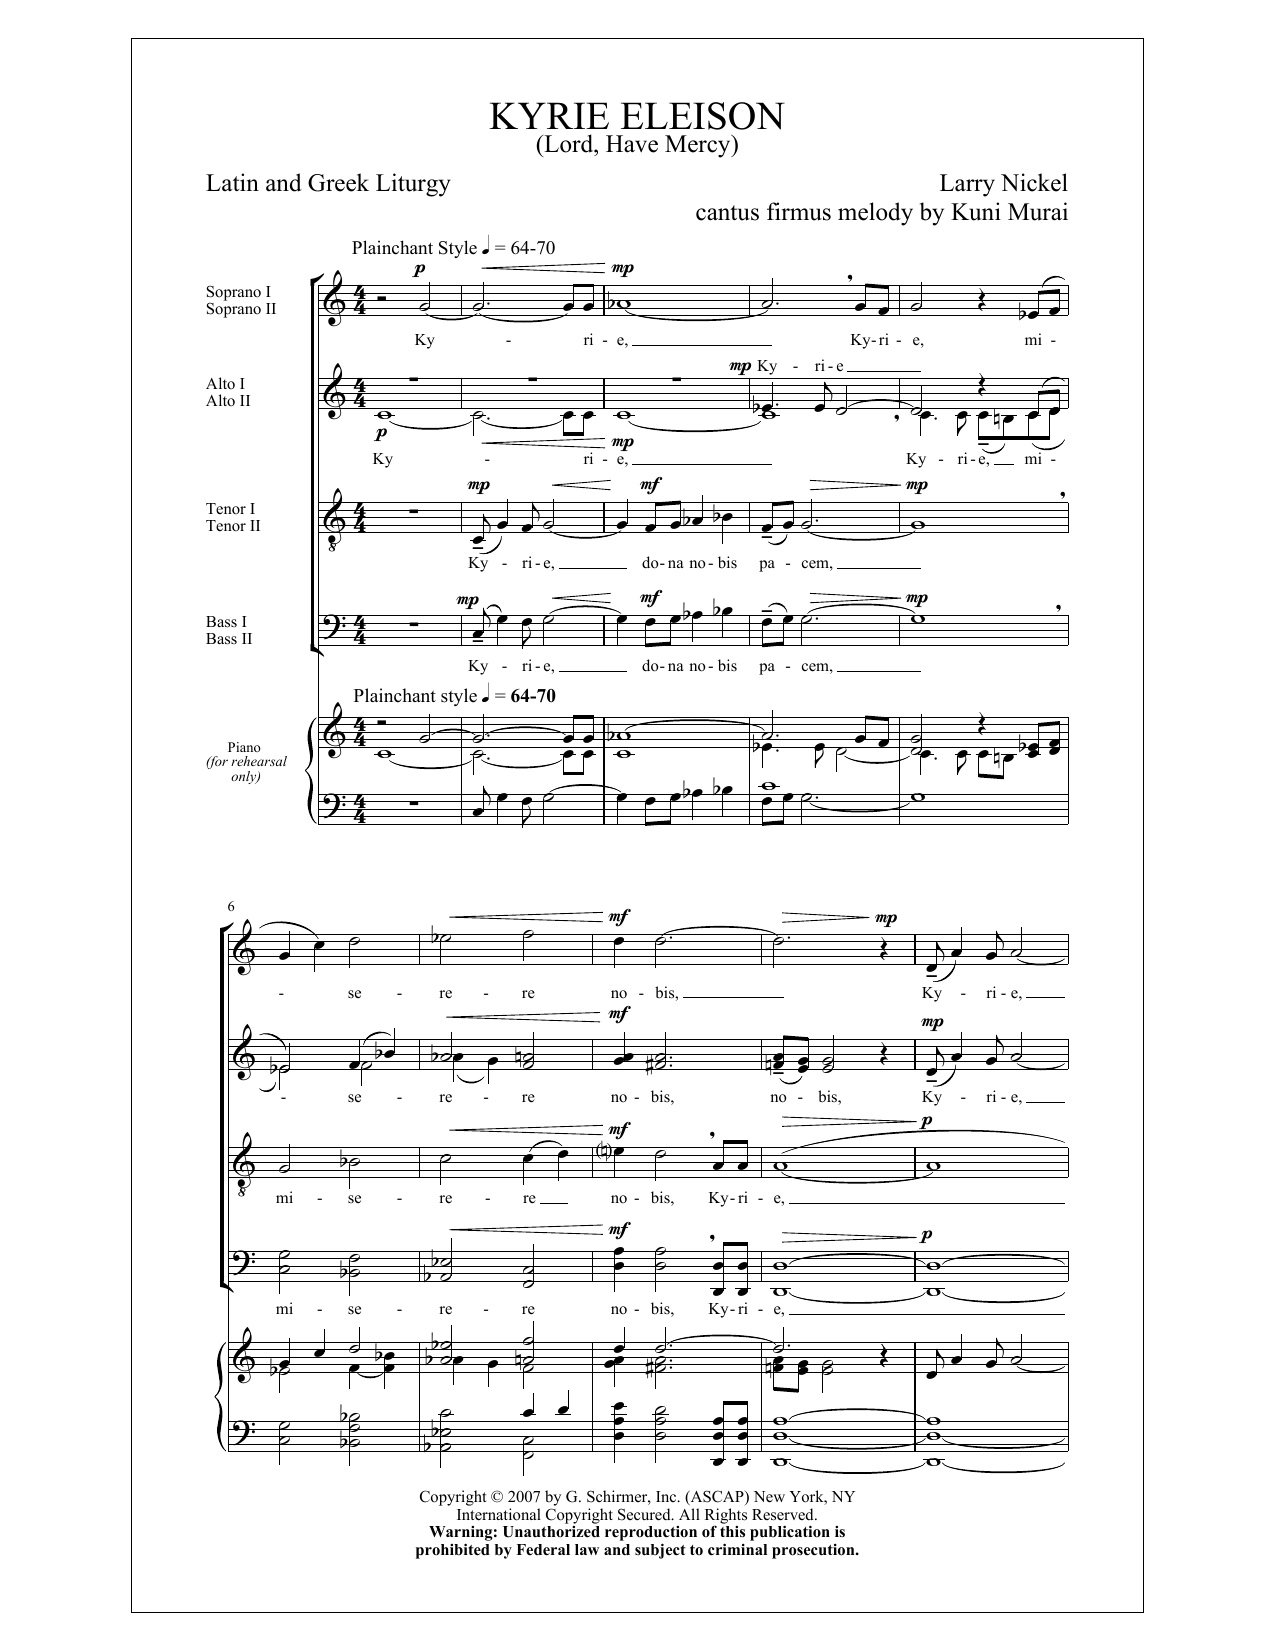 Download Larry Nickel Kyrie Eleison (Lord, Have Mercy) Sheet Music